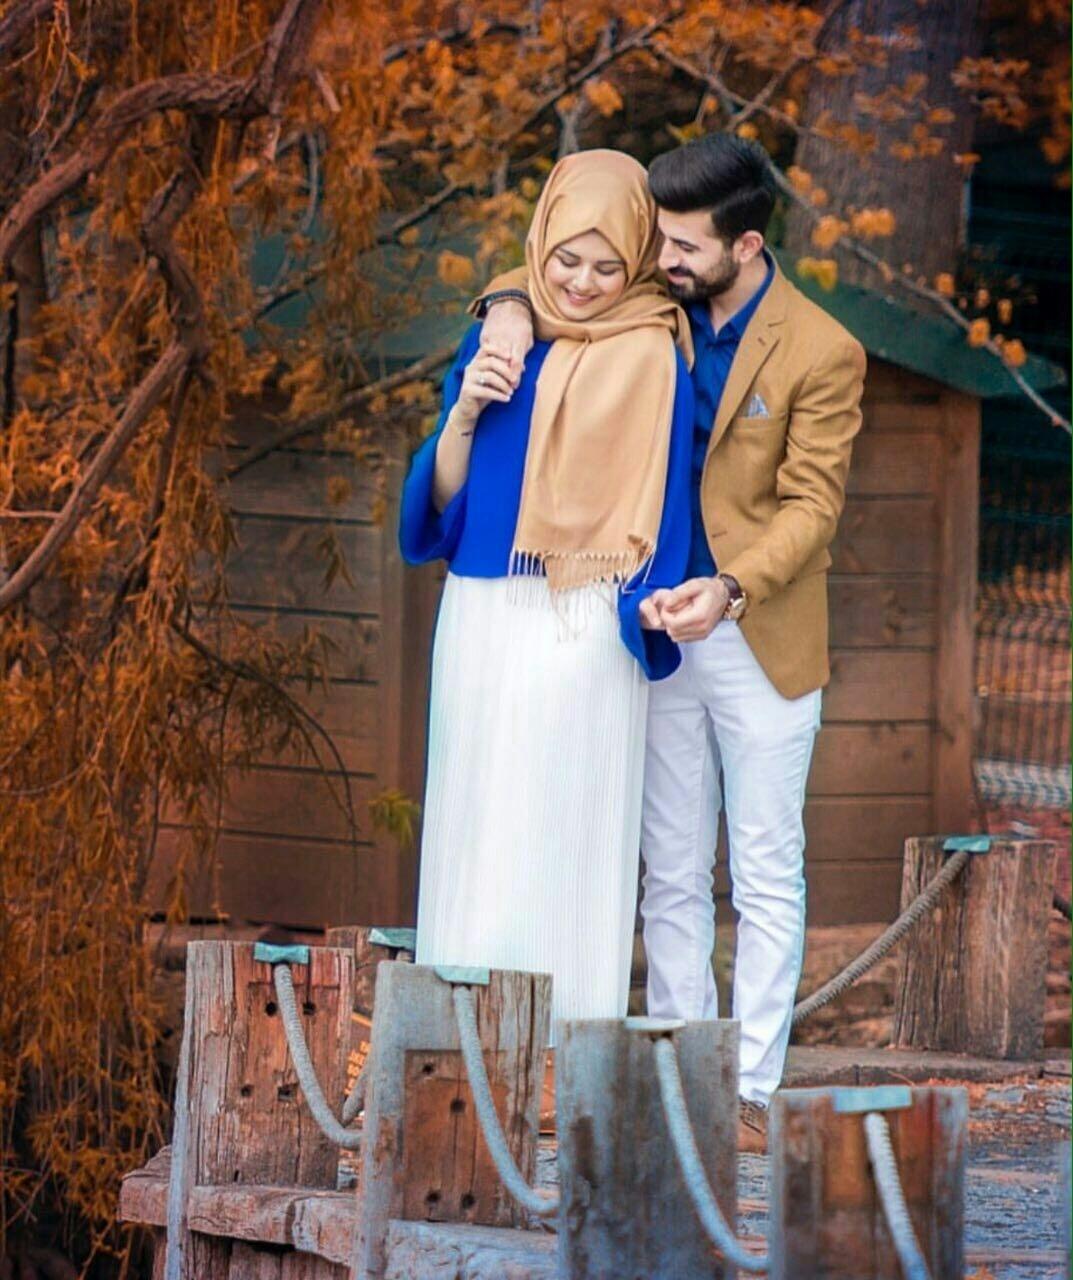 image about cute Muslim couple